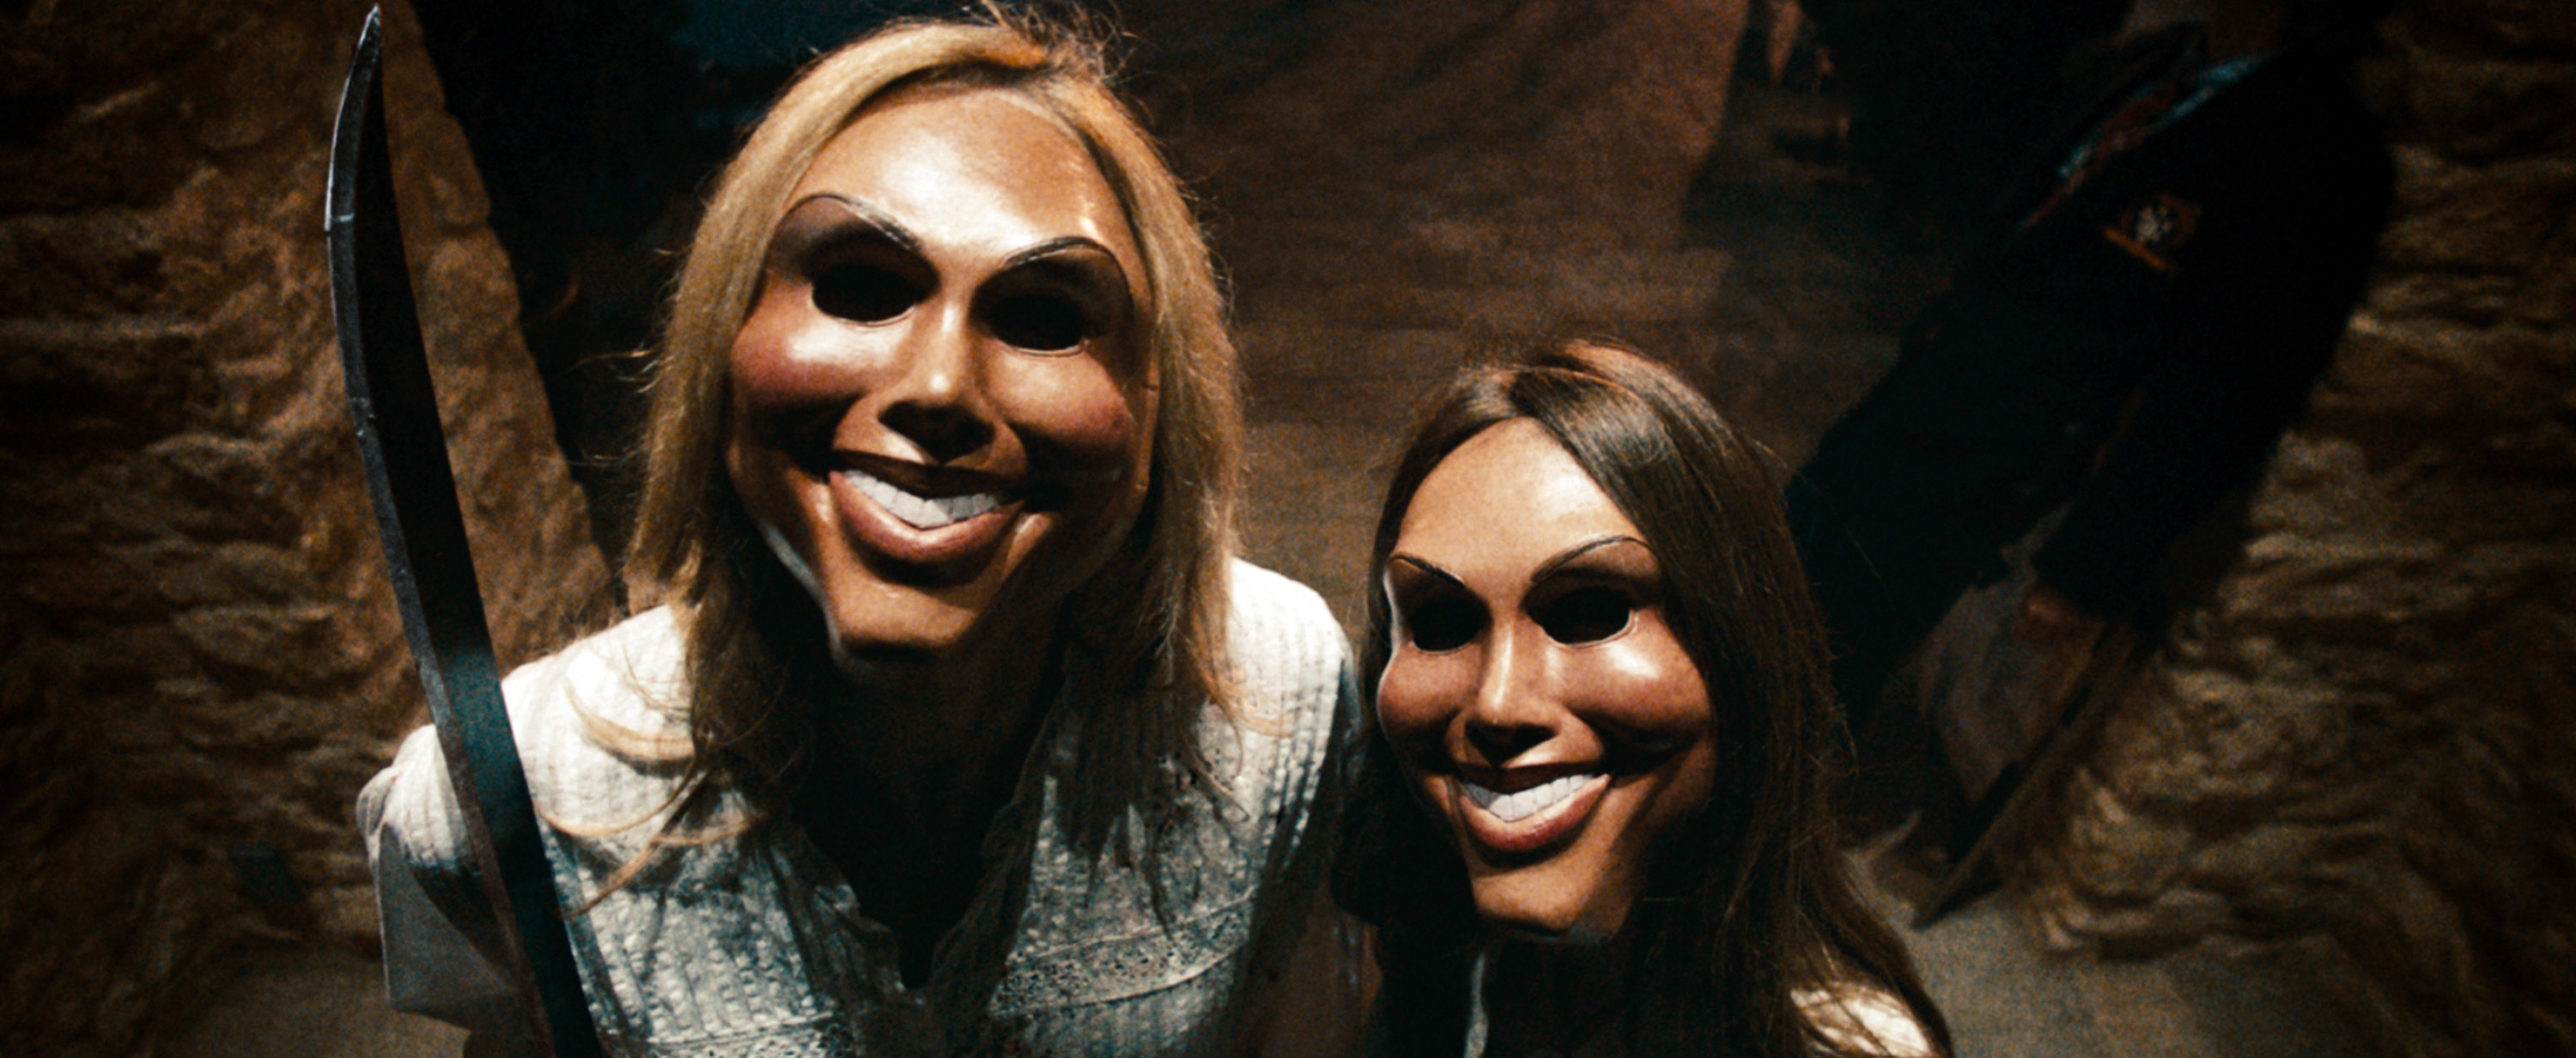 Screenshot from &quot;The Purge&quot;